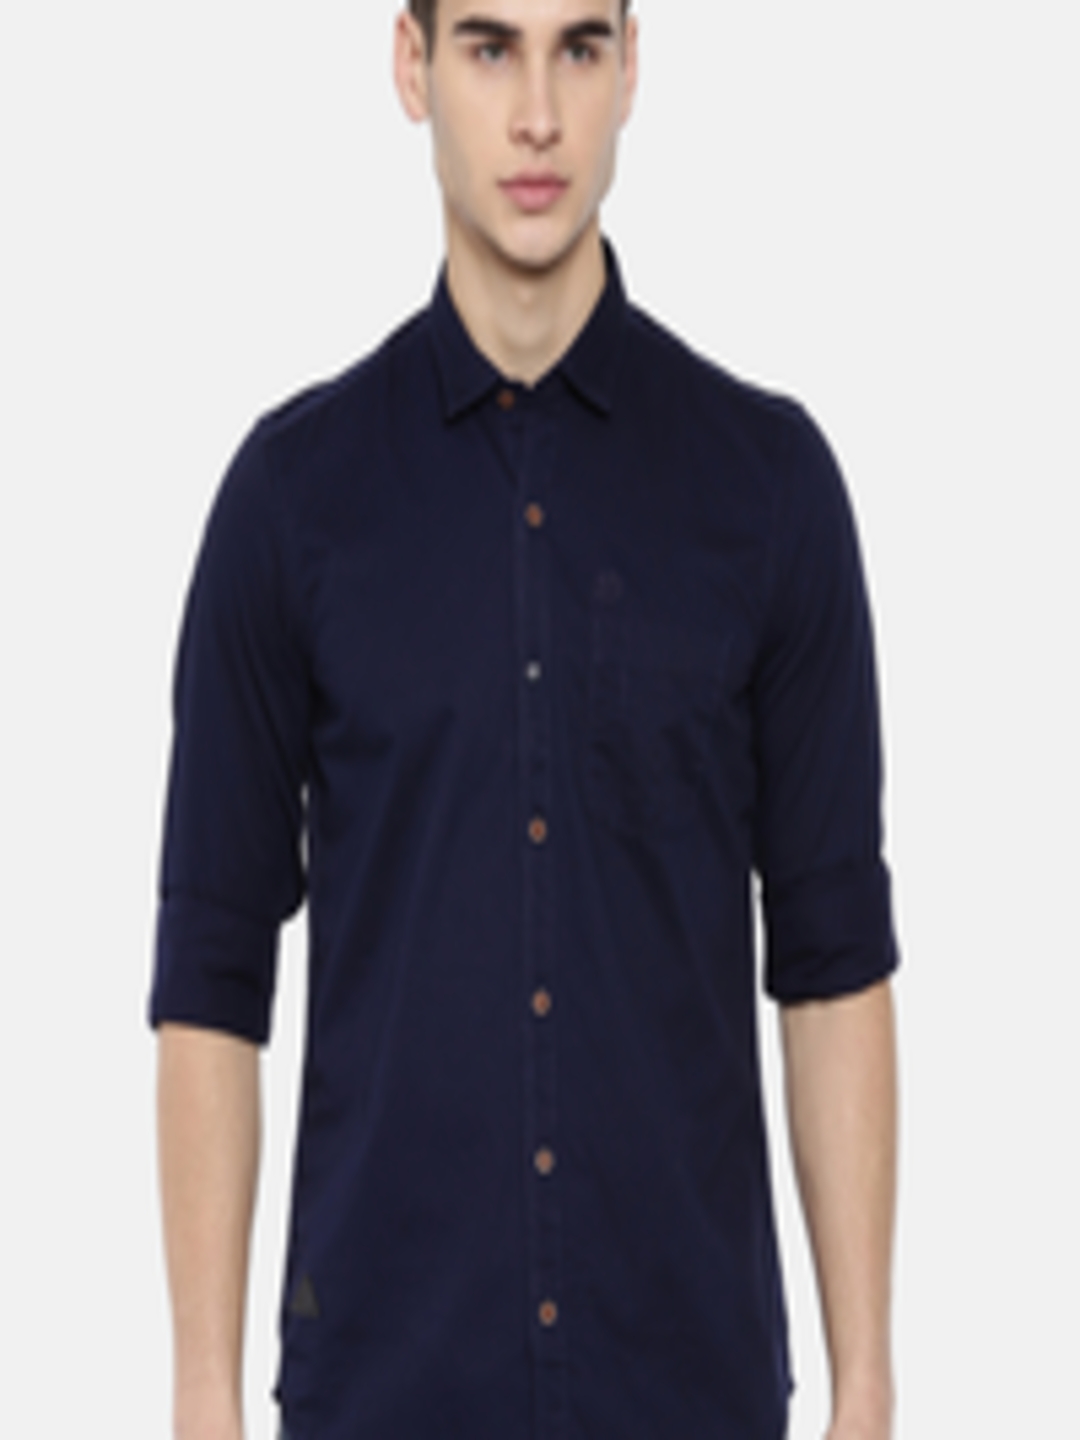 Buy IDC Men Navy Blue Slim Fit Solid Casual Shirt - Shirts for Men ...